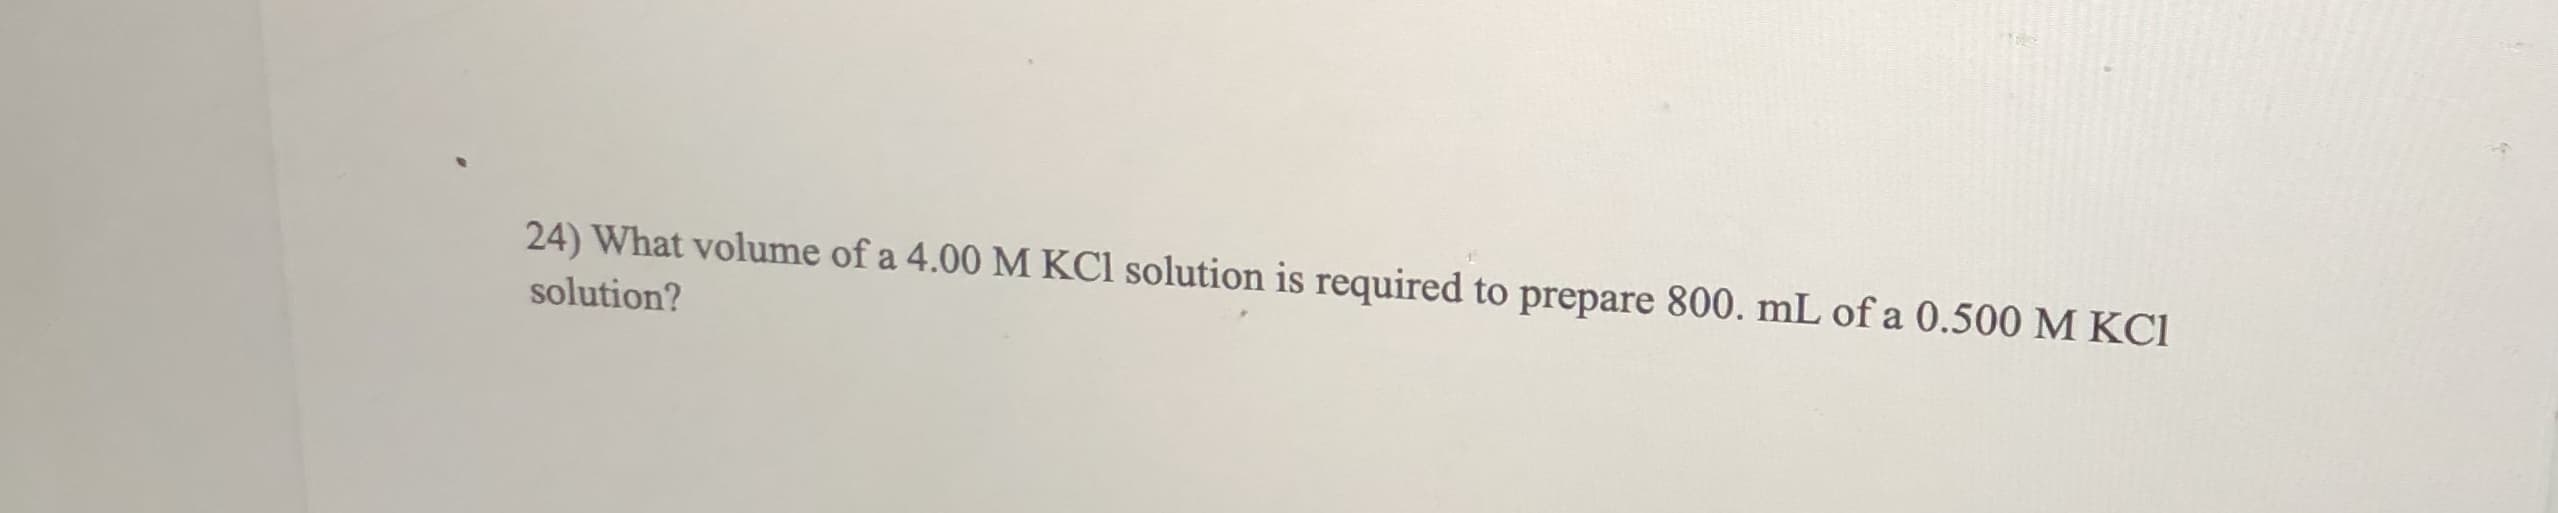 24) What volume of a 4.00 M KCI solution is required to prepare 800. mL of a 0.500 M KCI
solution?
